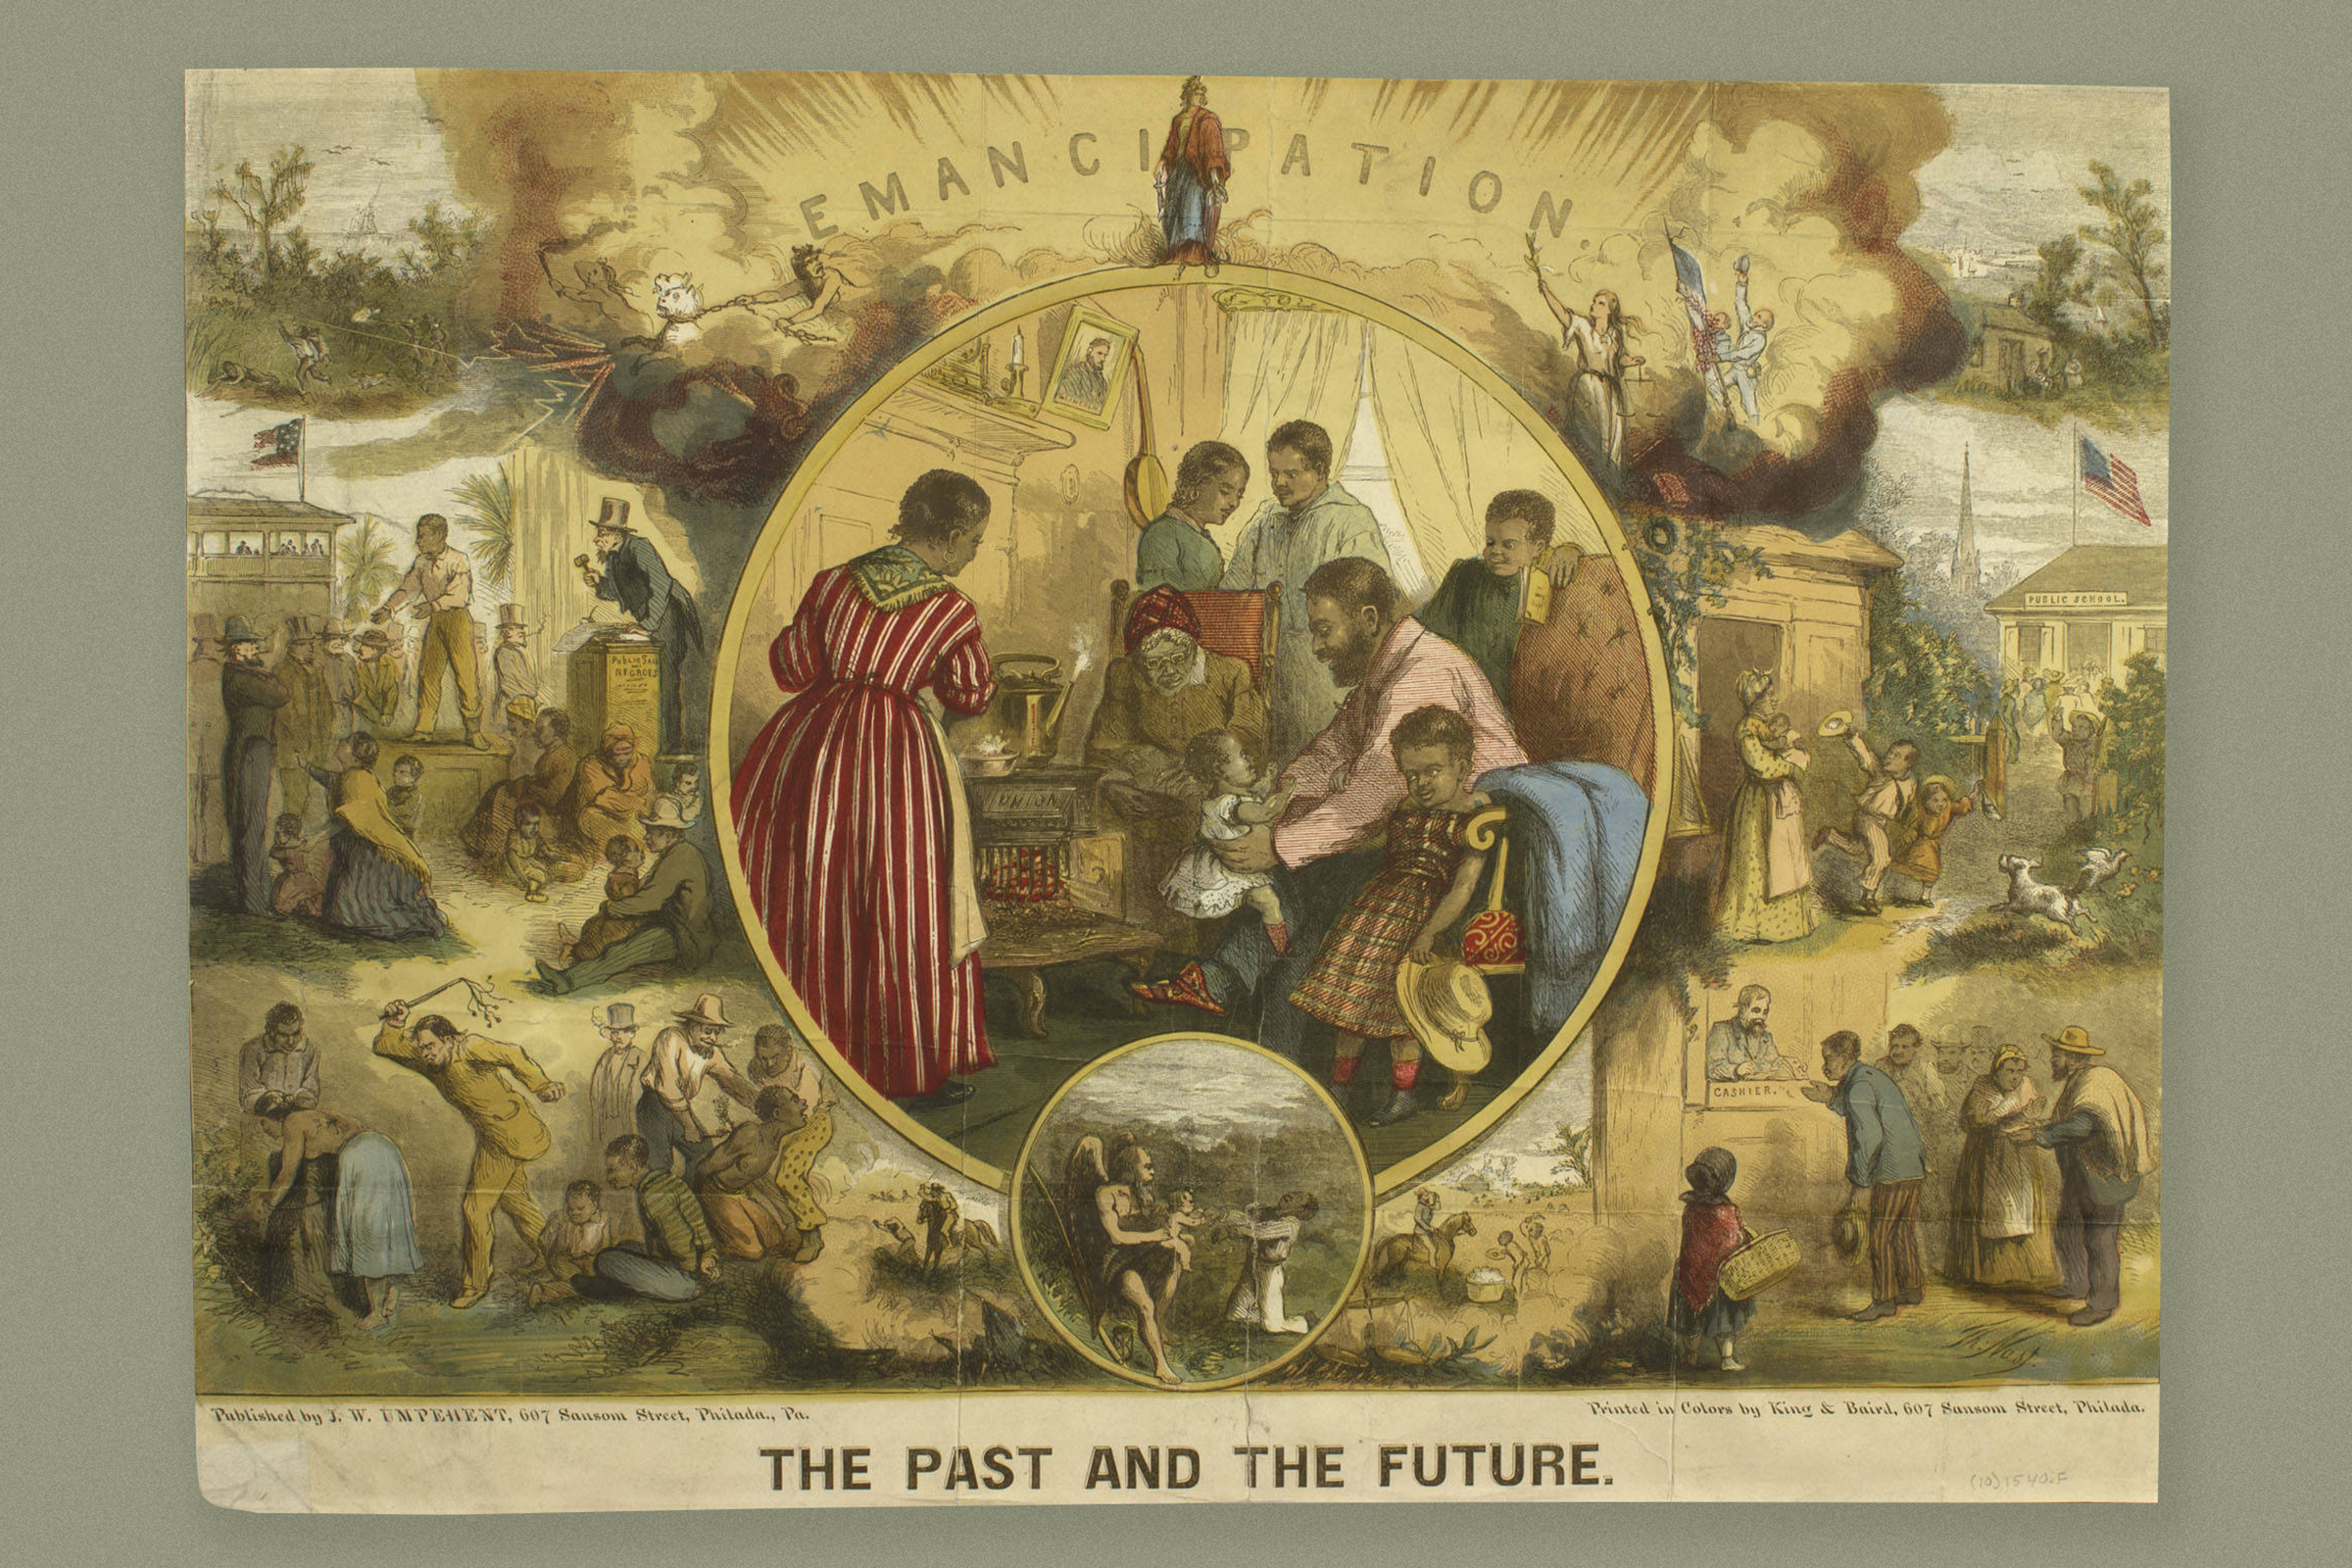 Emancipation print from 1863 depicting a series of scenes contrasting African American life before and after slavery. (Library Company of Philadelphia)